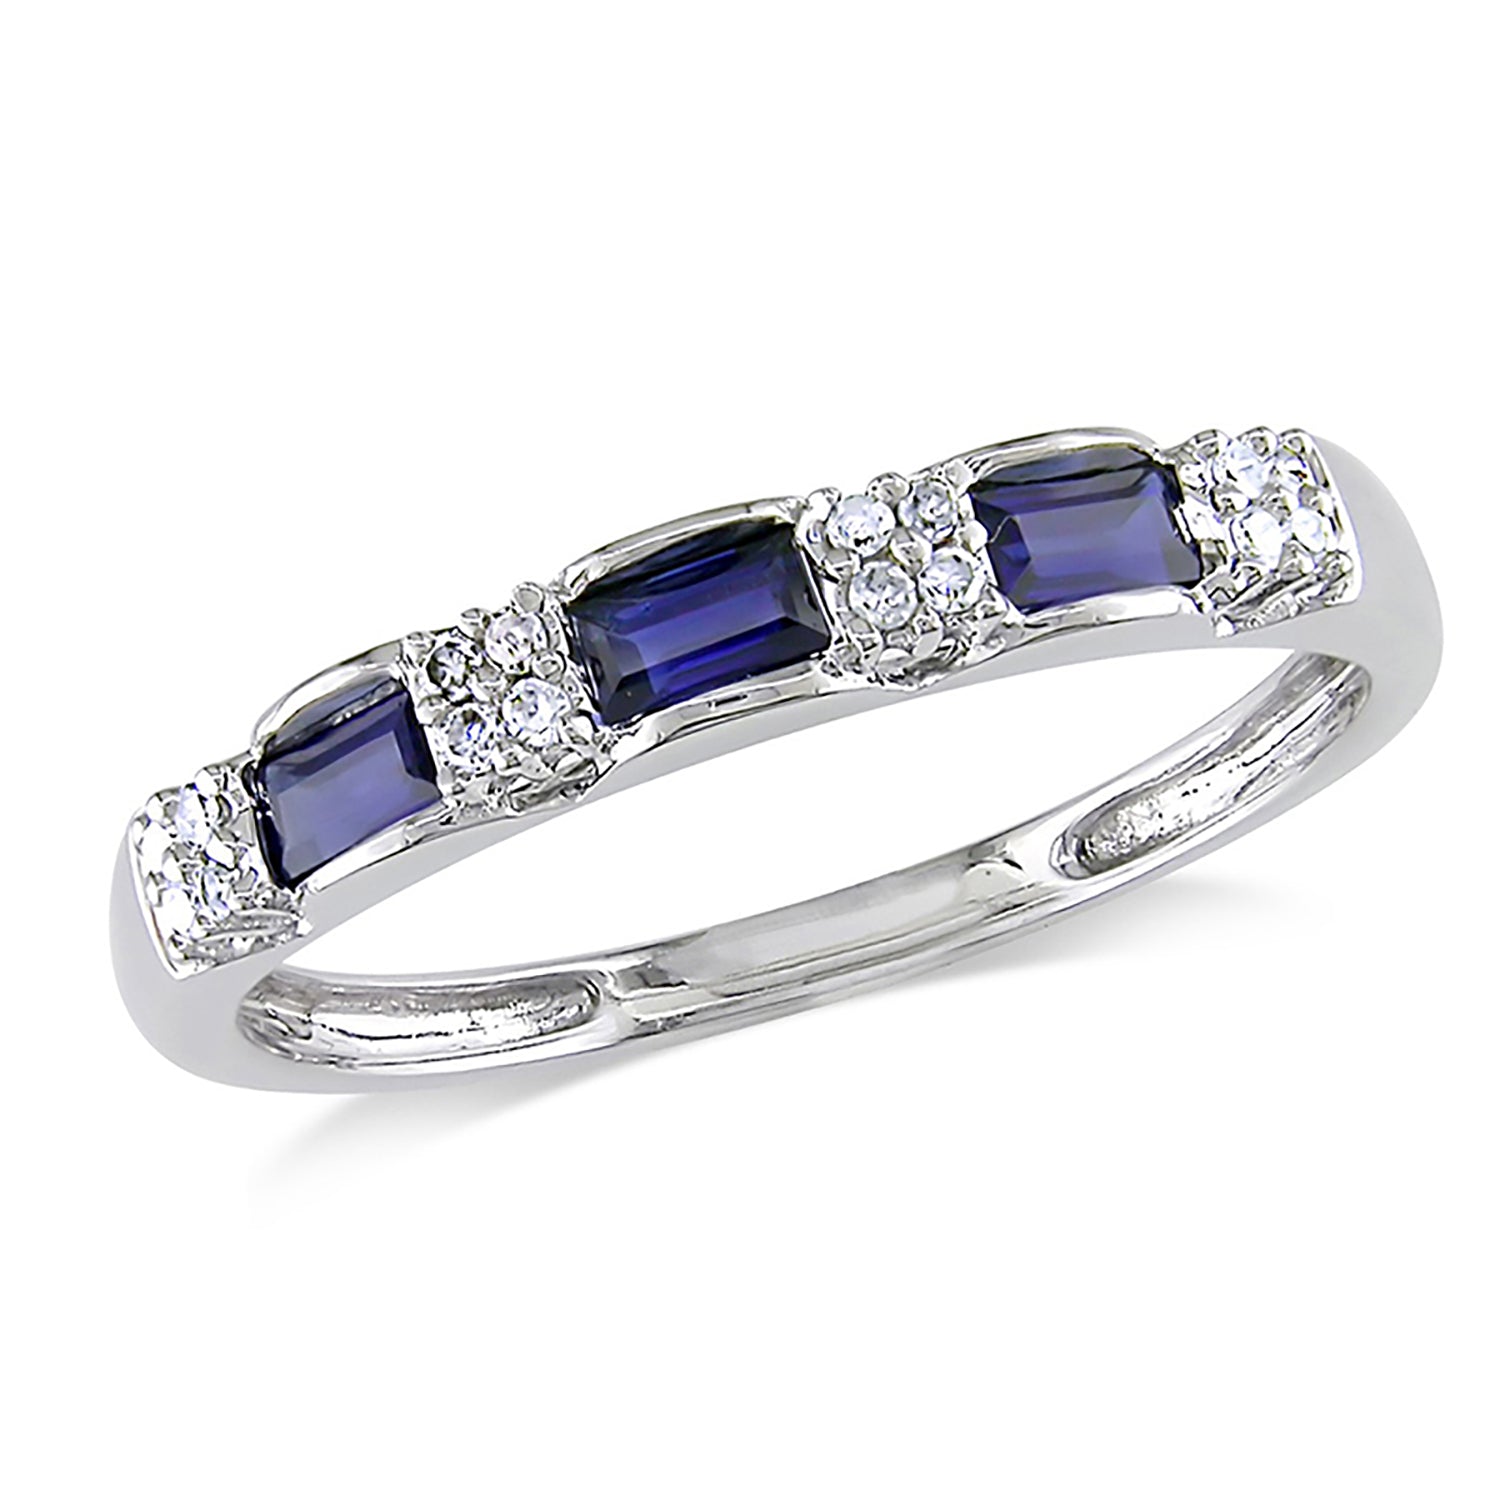 Rayna Anniversary Band Ring Blue Cz Sterling Silver Womens Ginger Lyne Collection Size 6 - 6